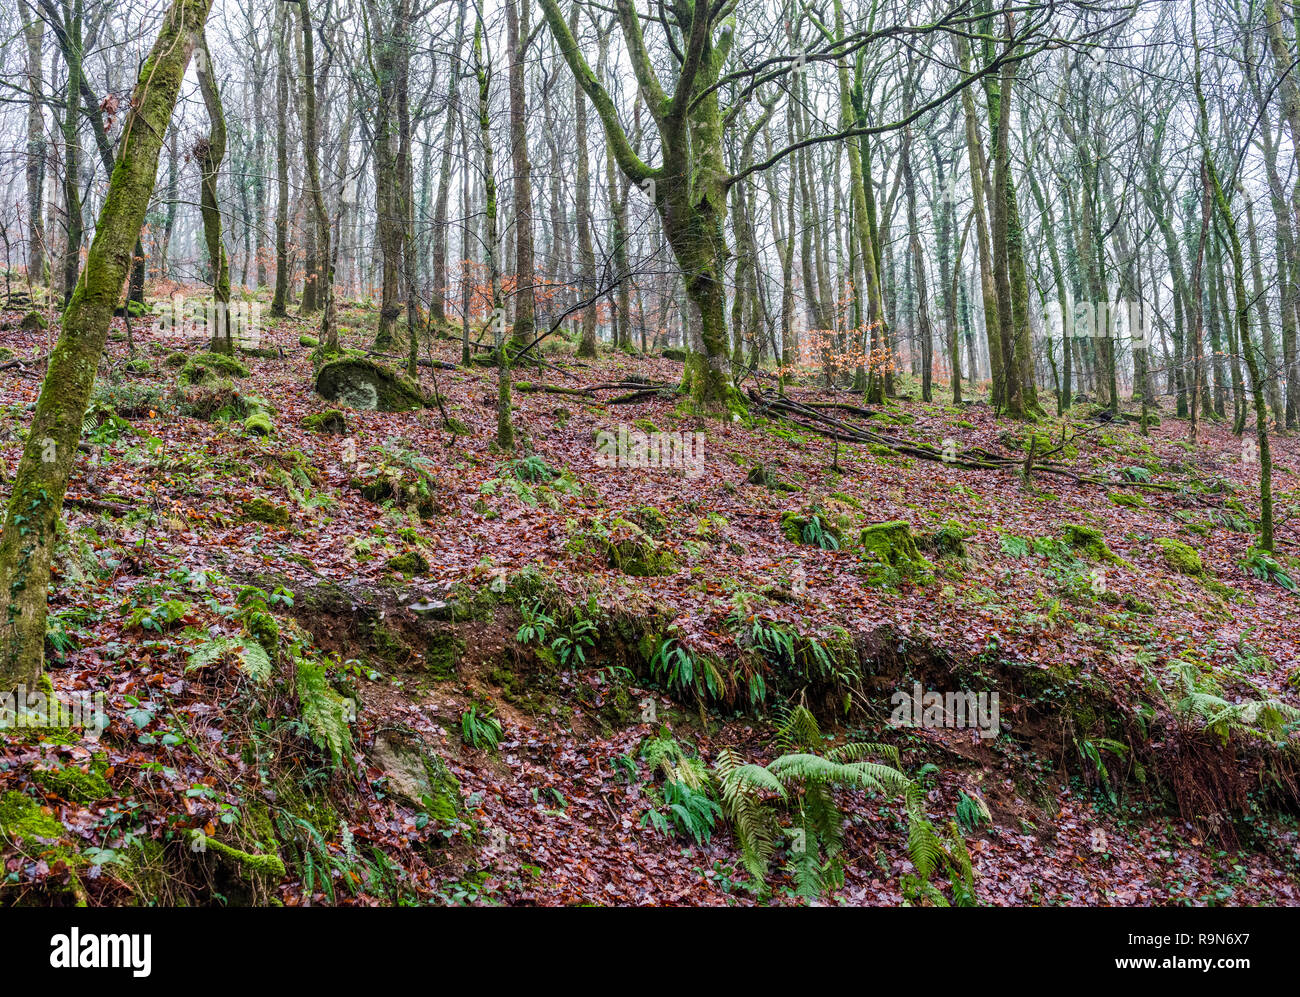 The steep wooded slopes on the south side of the Teign Gorge at Hannicombe Wood near Fingle Bridge, Dartmoor National Park, Devon, UK. Stock Photo